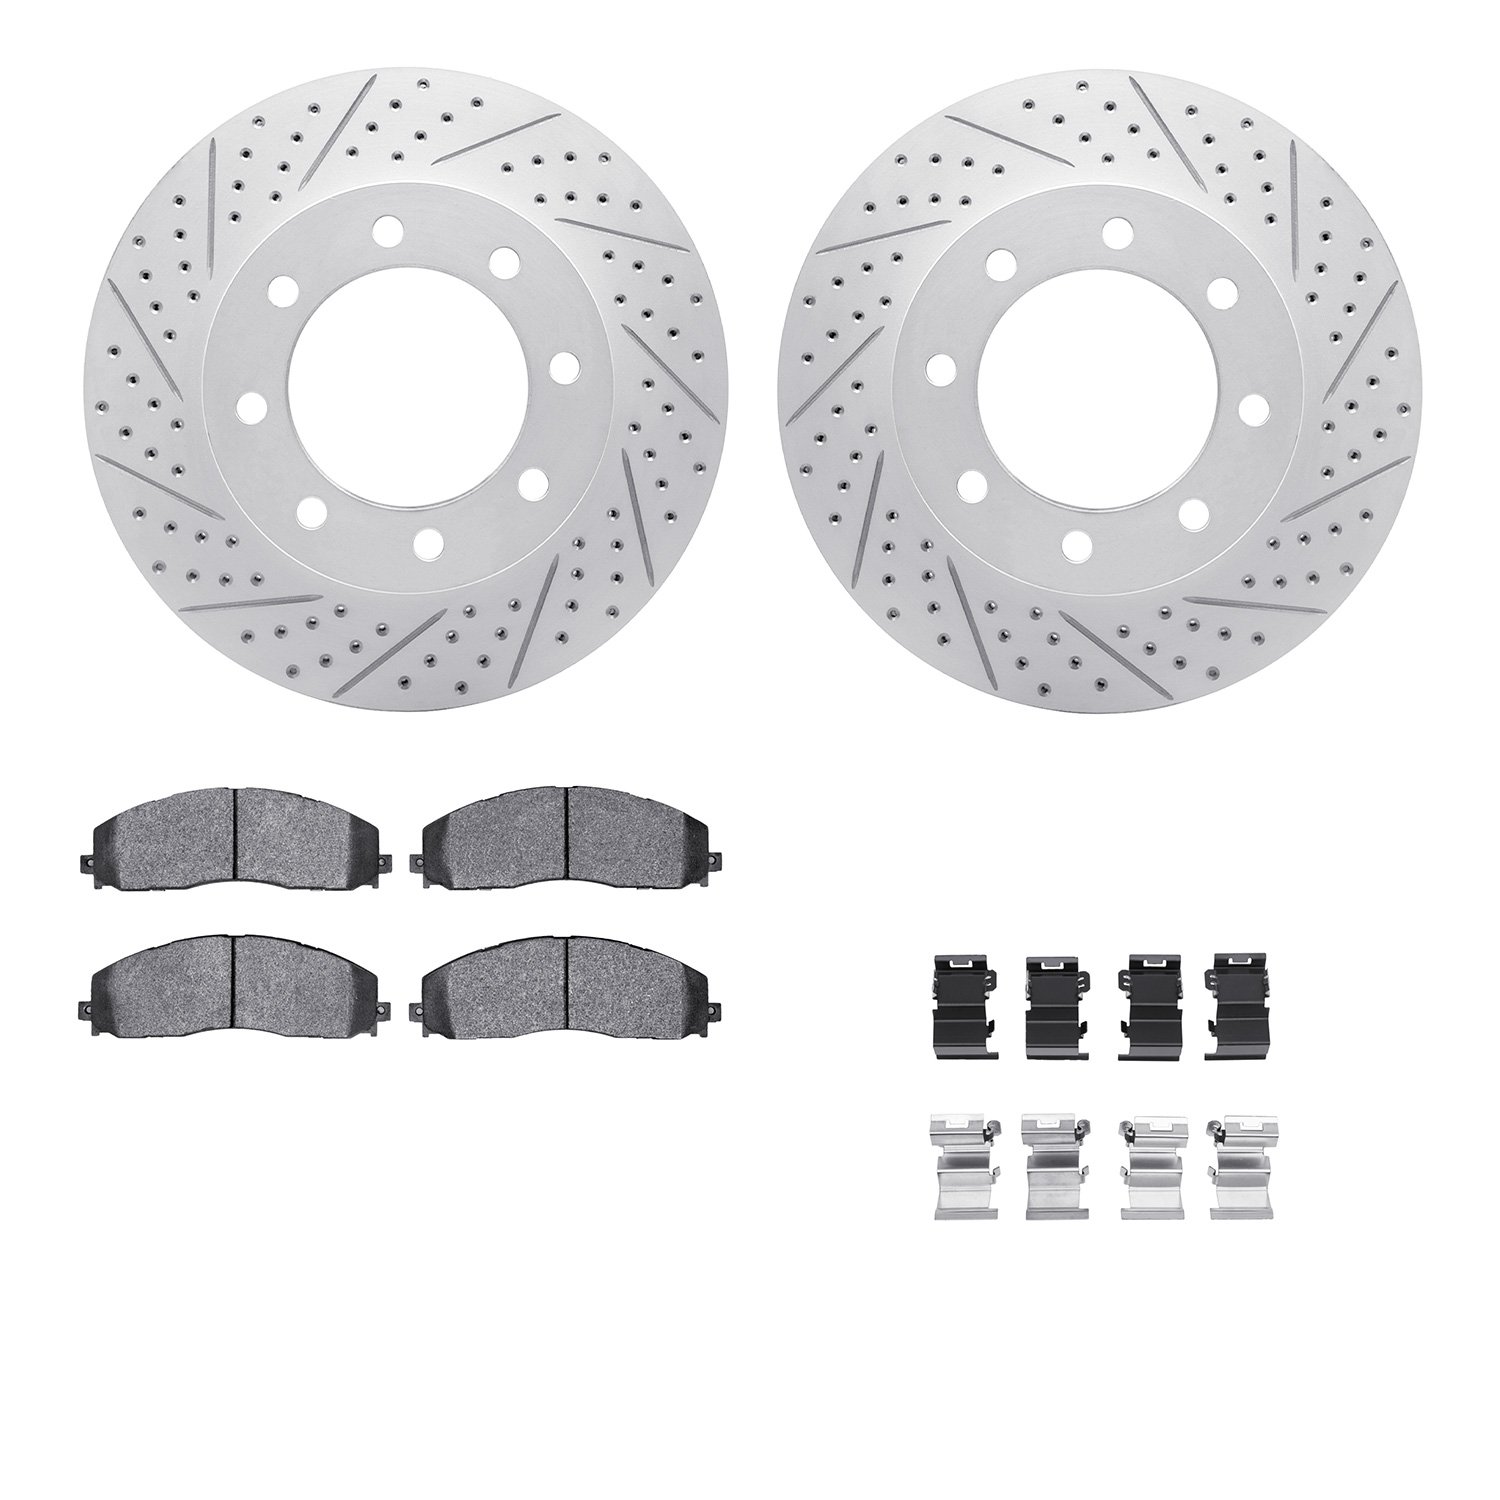 2512-54132 Geoperformance Drilled/Slotted Rotors w/5000 Advanced Brake Pads Kit & Hardware, Fits Select Ford/Lincoln/Mercury/Maz